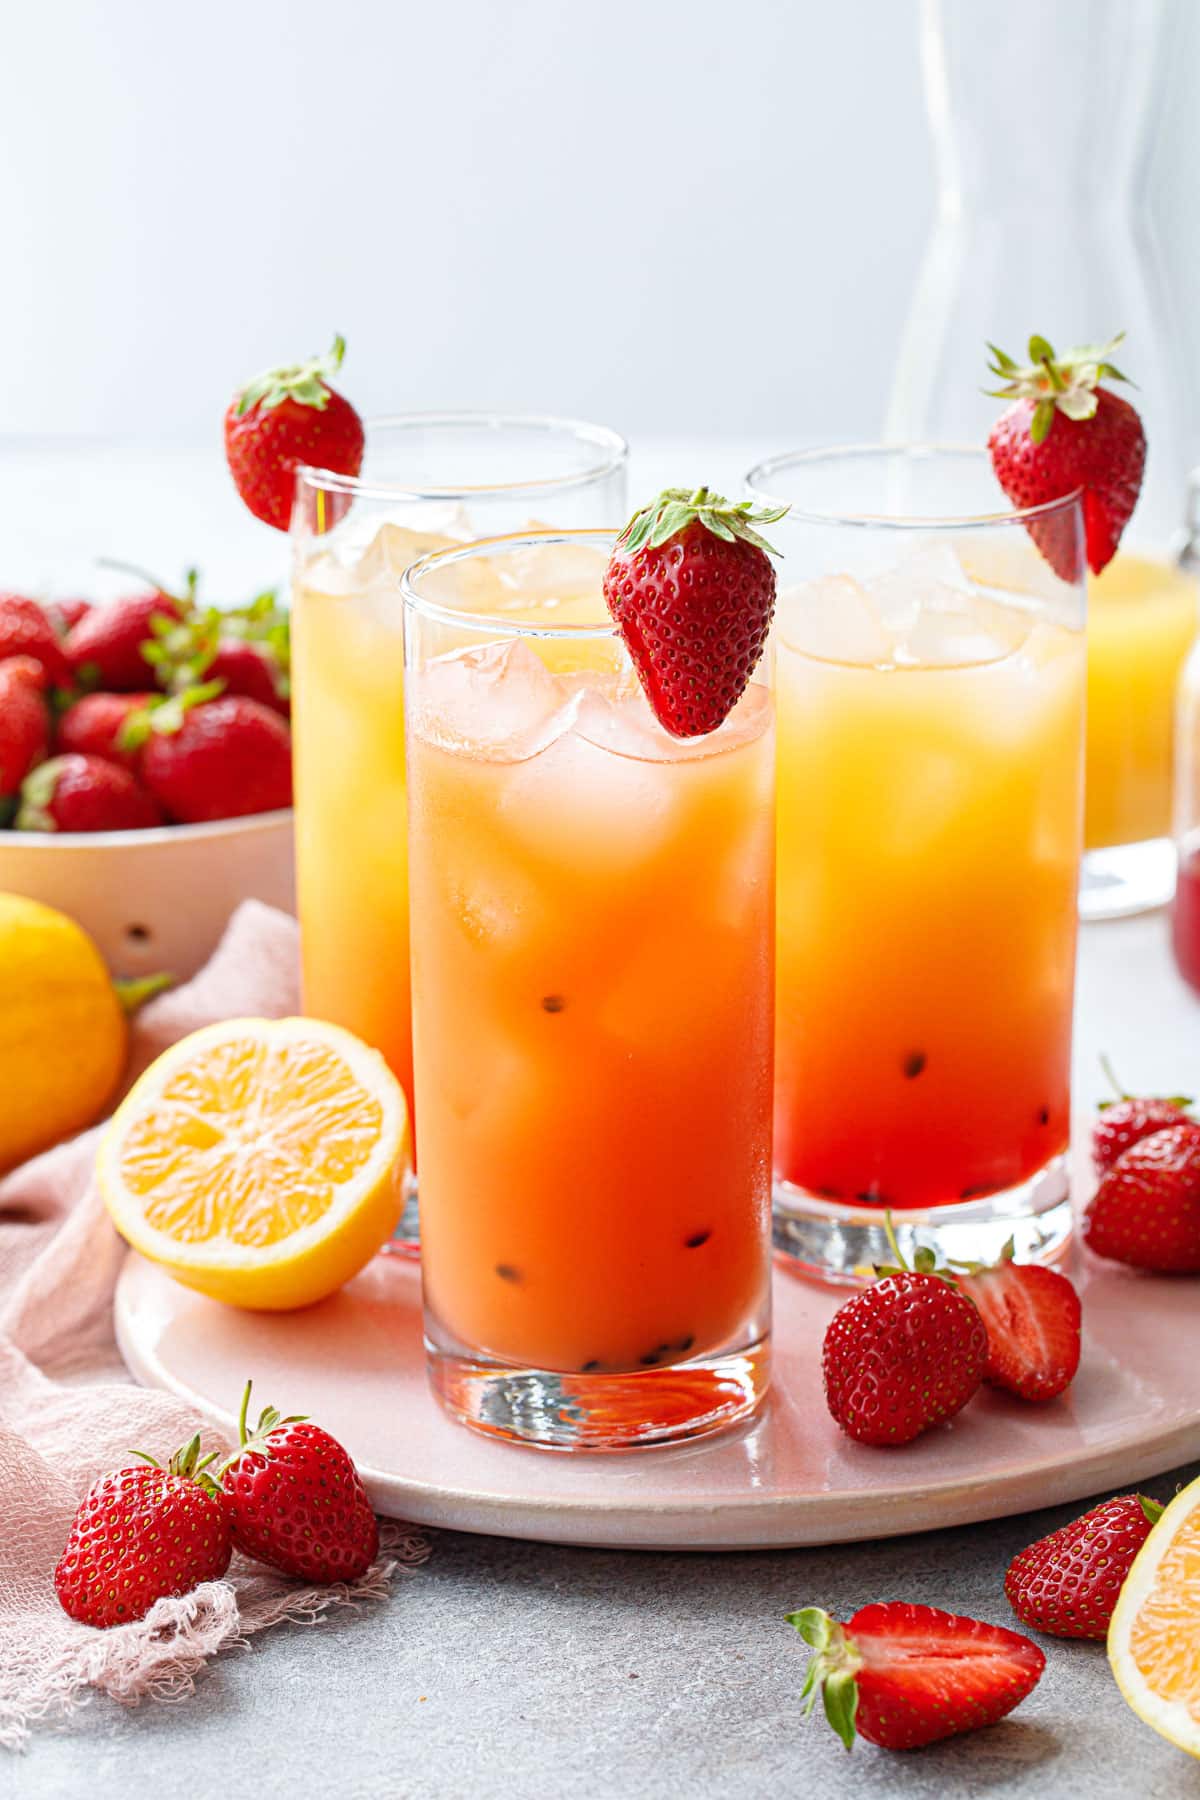 Three glasses of Strawberry Passionfruit Lemonade, one stirred for a solid orange color, the others showing a gradient red to yellow, with strawberries on the rim of each glass.